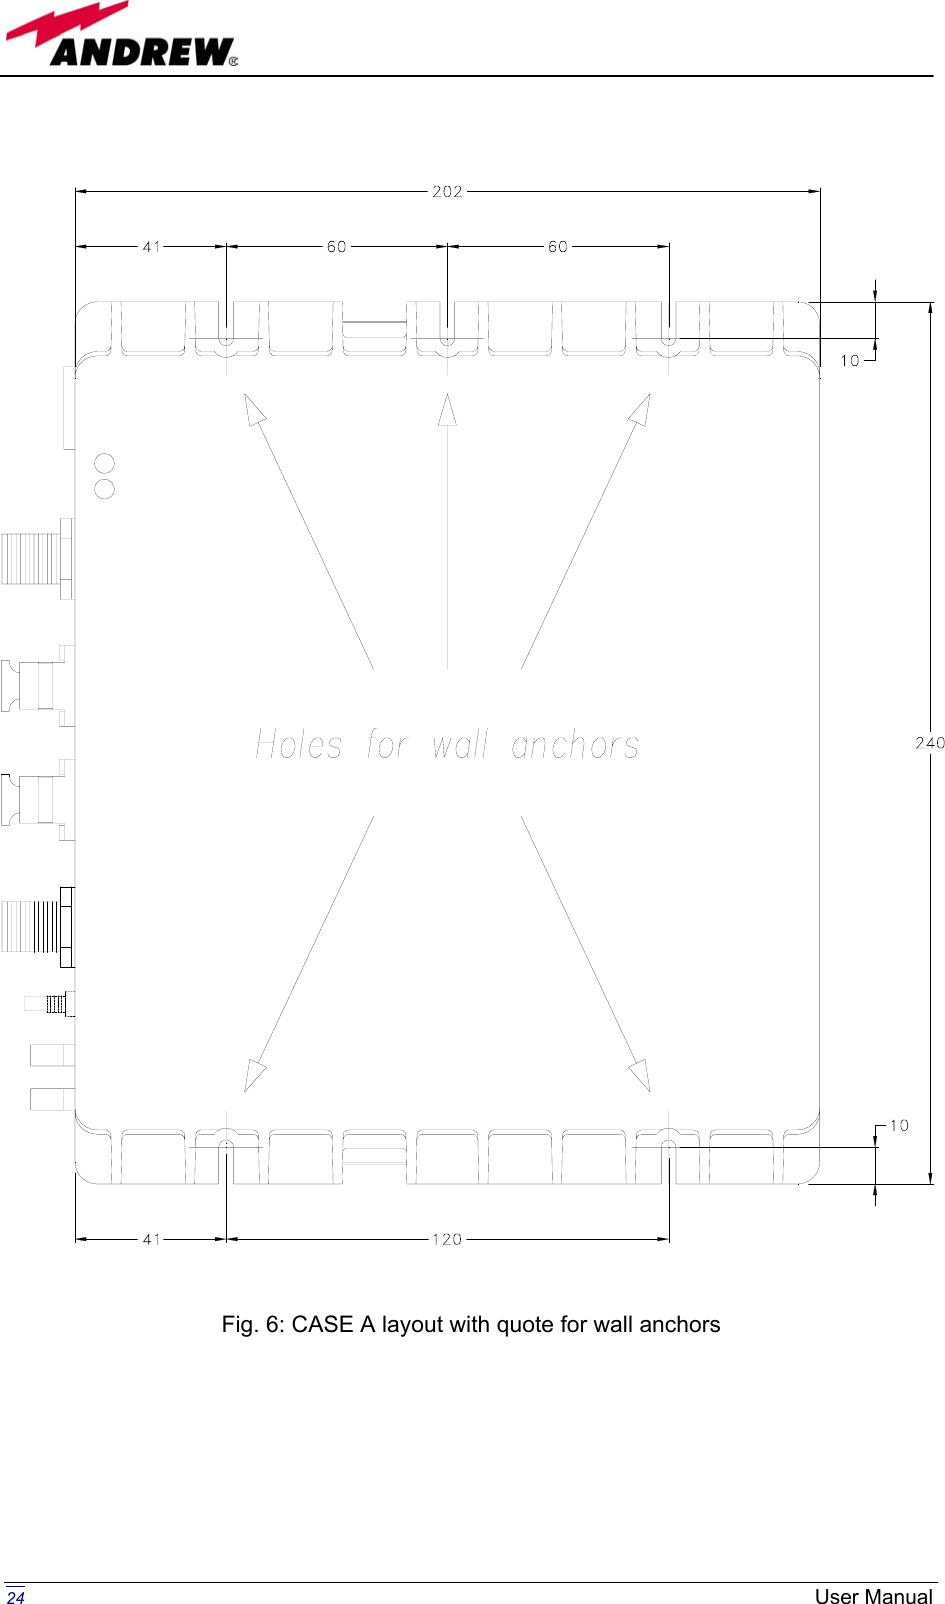    Fig. 6: CASE A layout with quote for wall anchors  24  User Manual